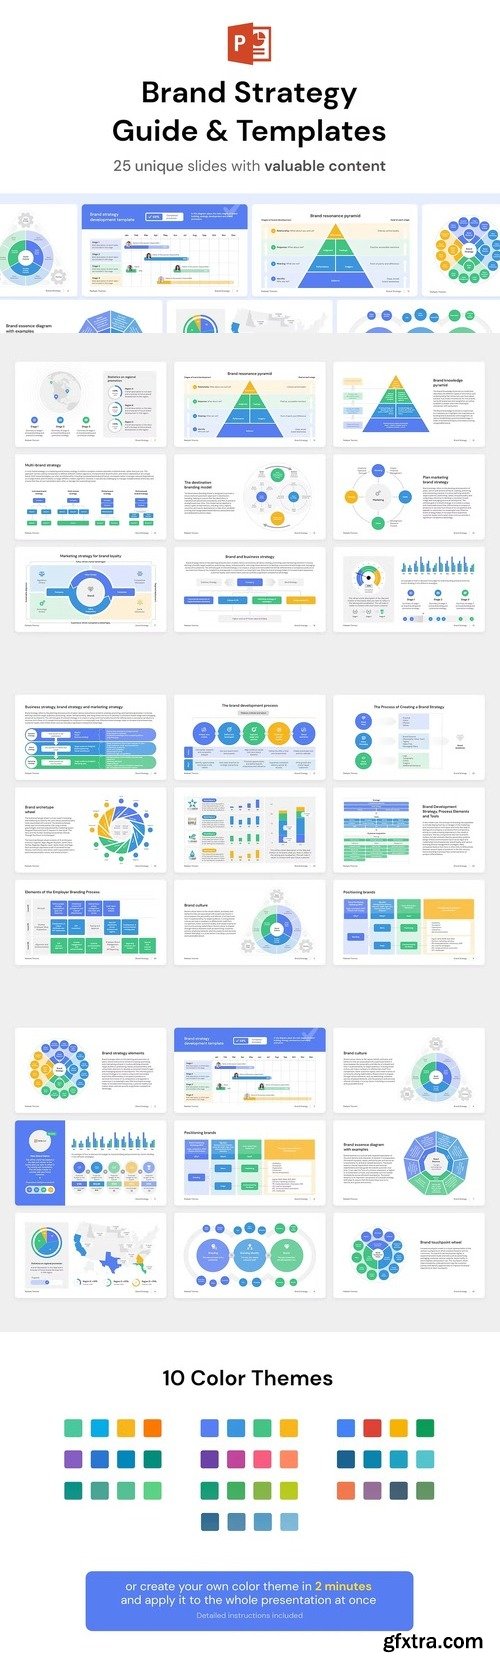 Brand Strategy Guide and Templates for PowerPoint 2UU46E9